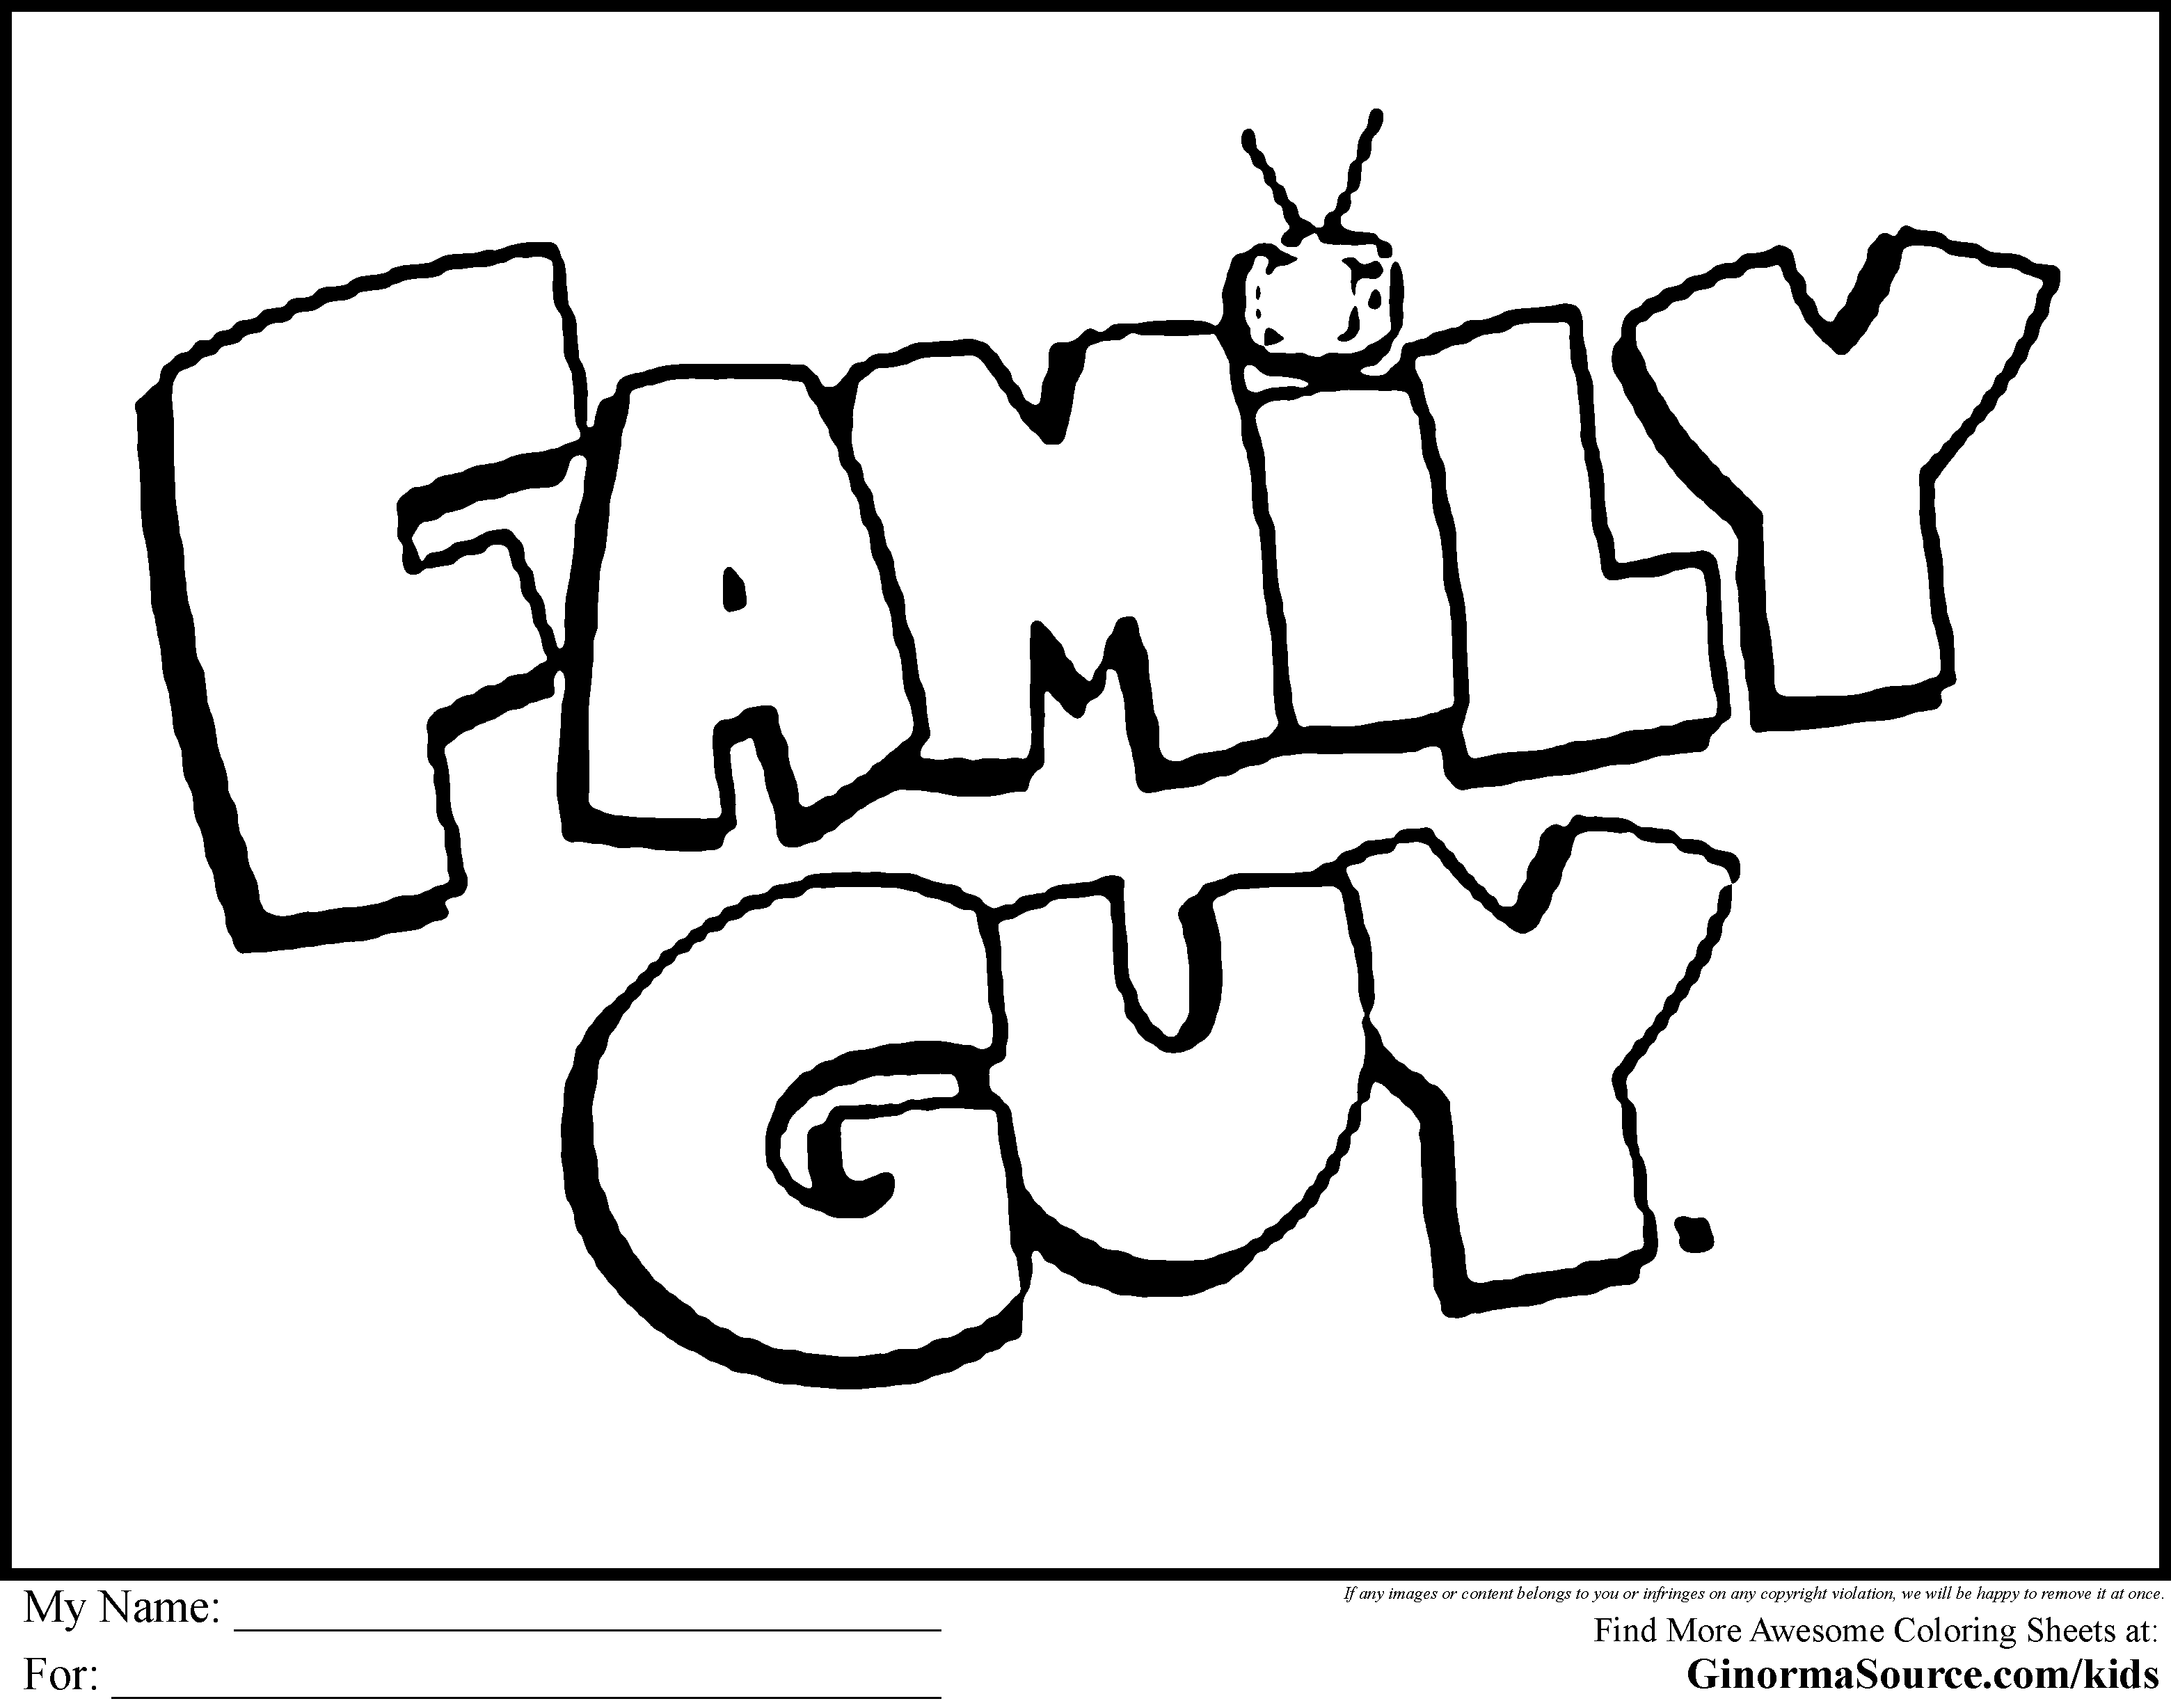 Family Guy Coloring Pictures - Coloring Pages for Kids and for Adults